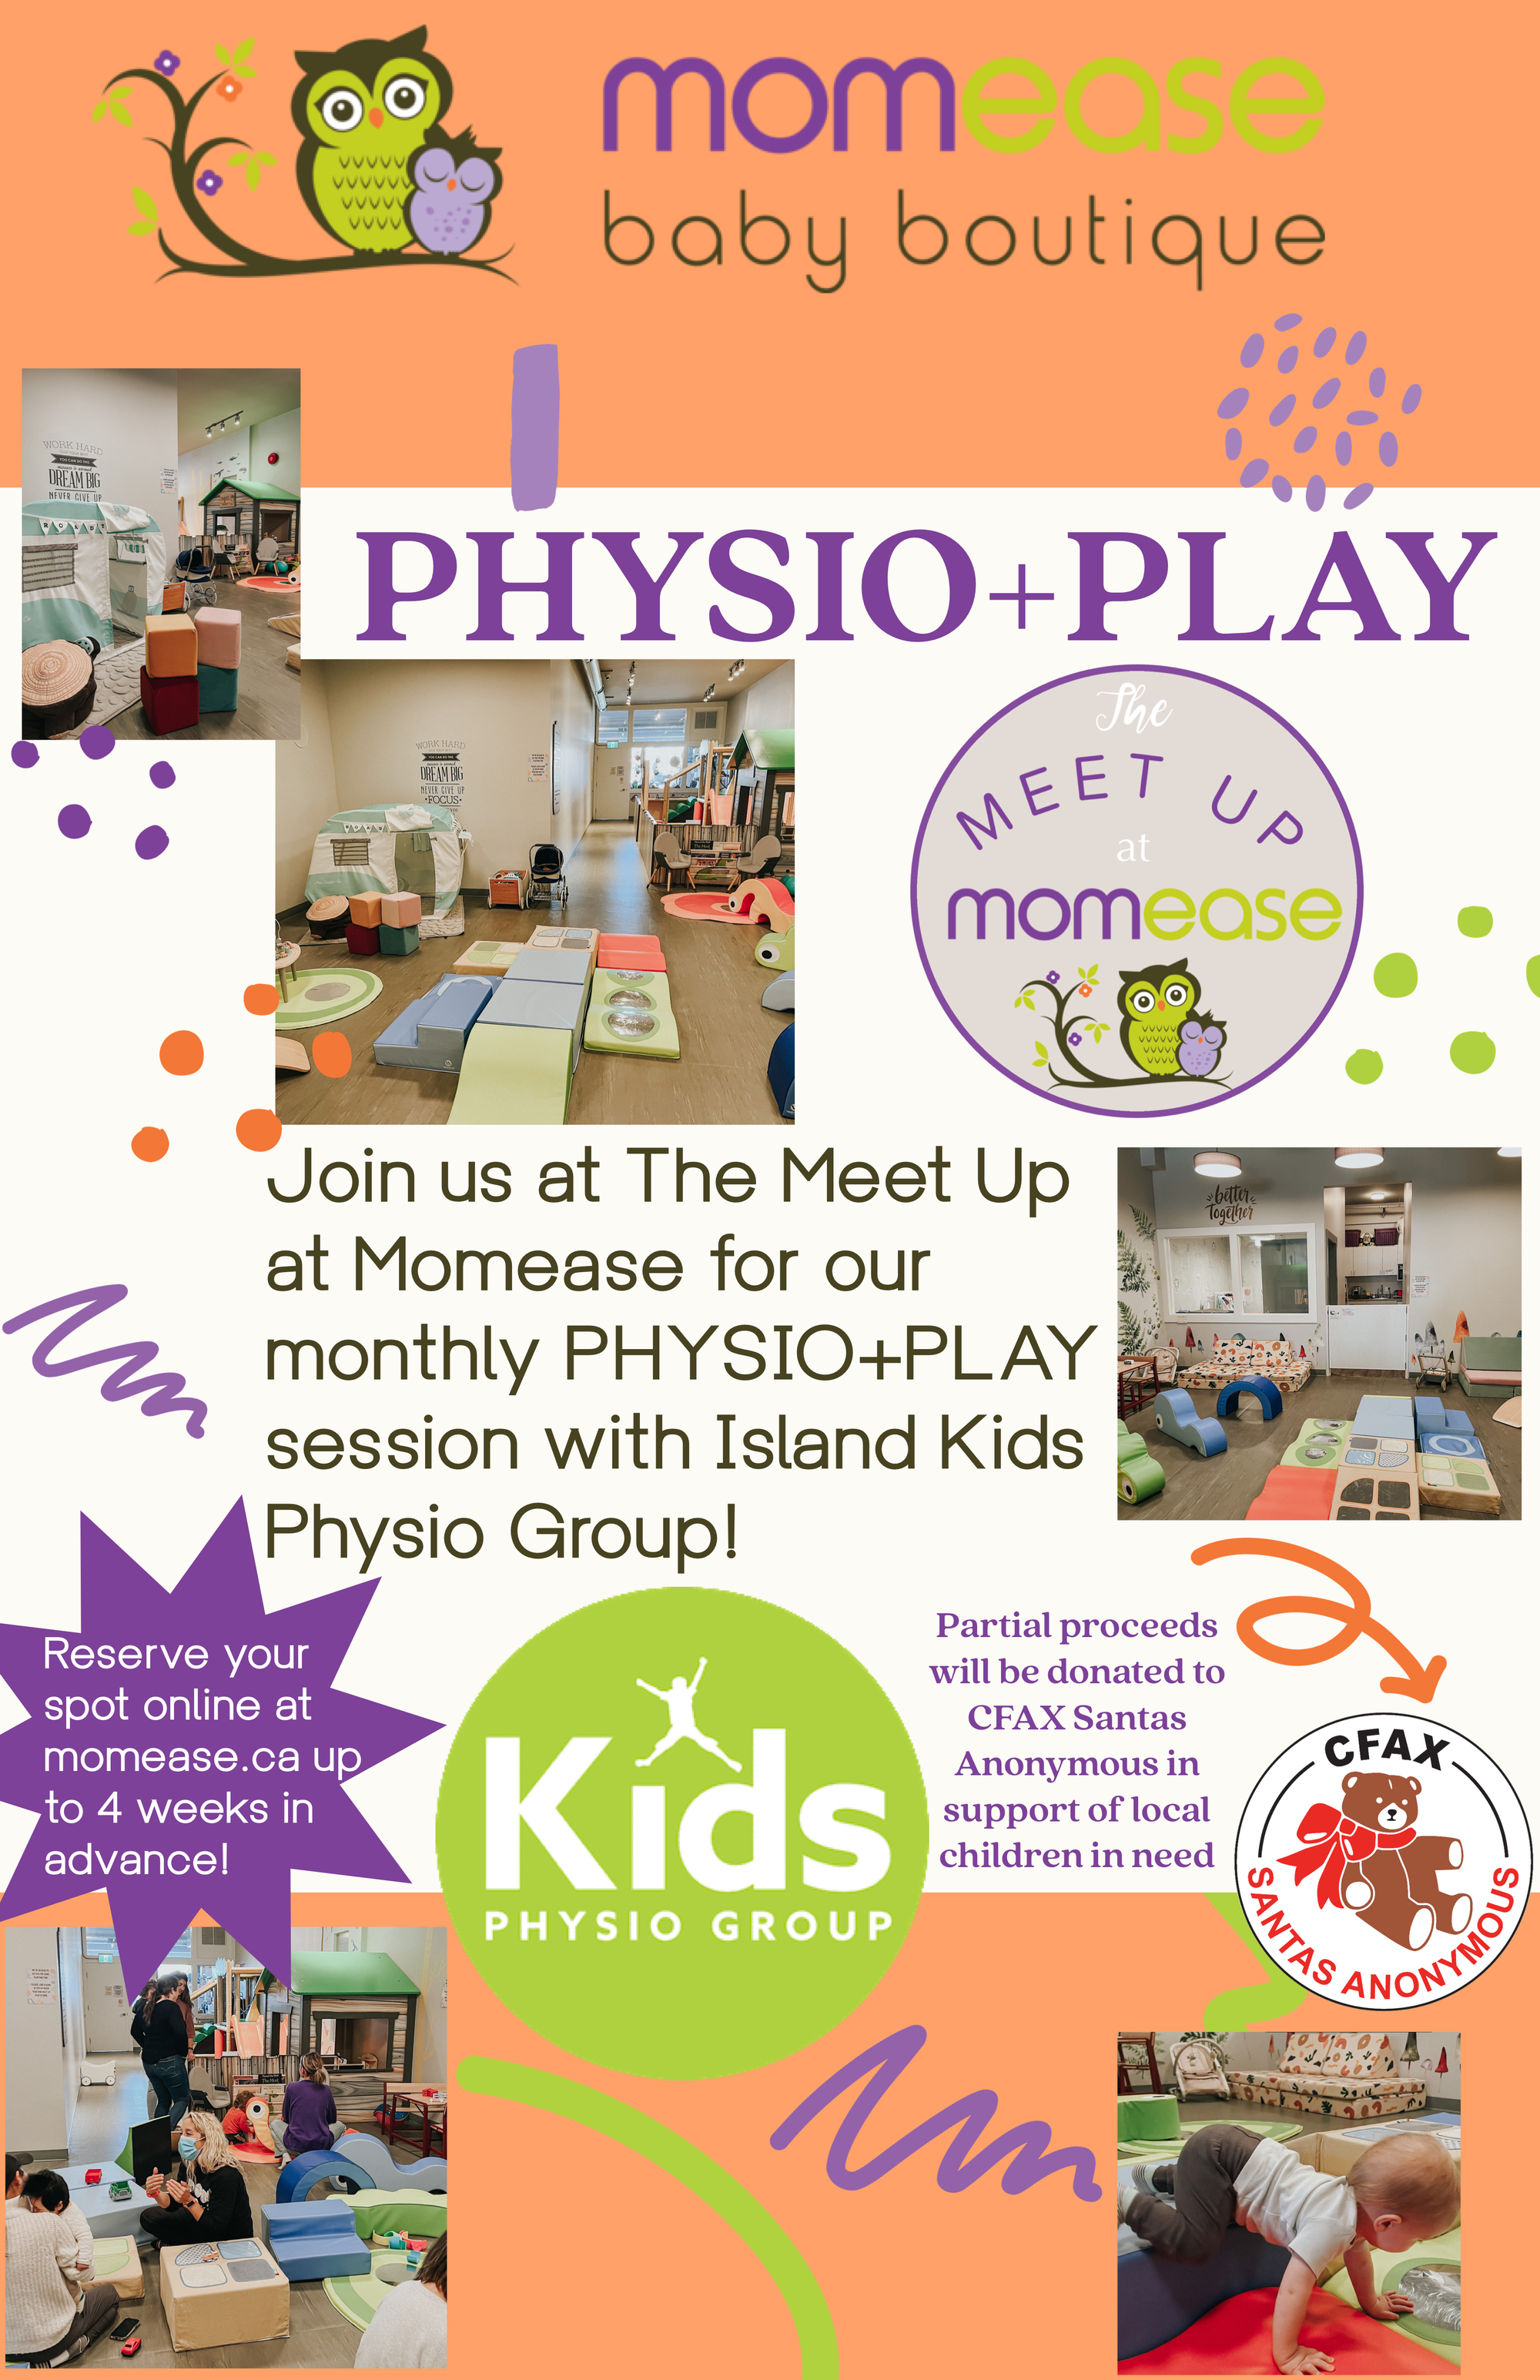 PHYSIO+PLAY at The Meet Up at Momease with Island Kids Physio Group